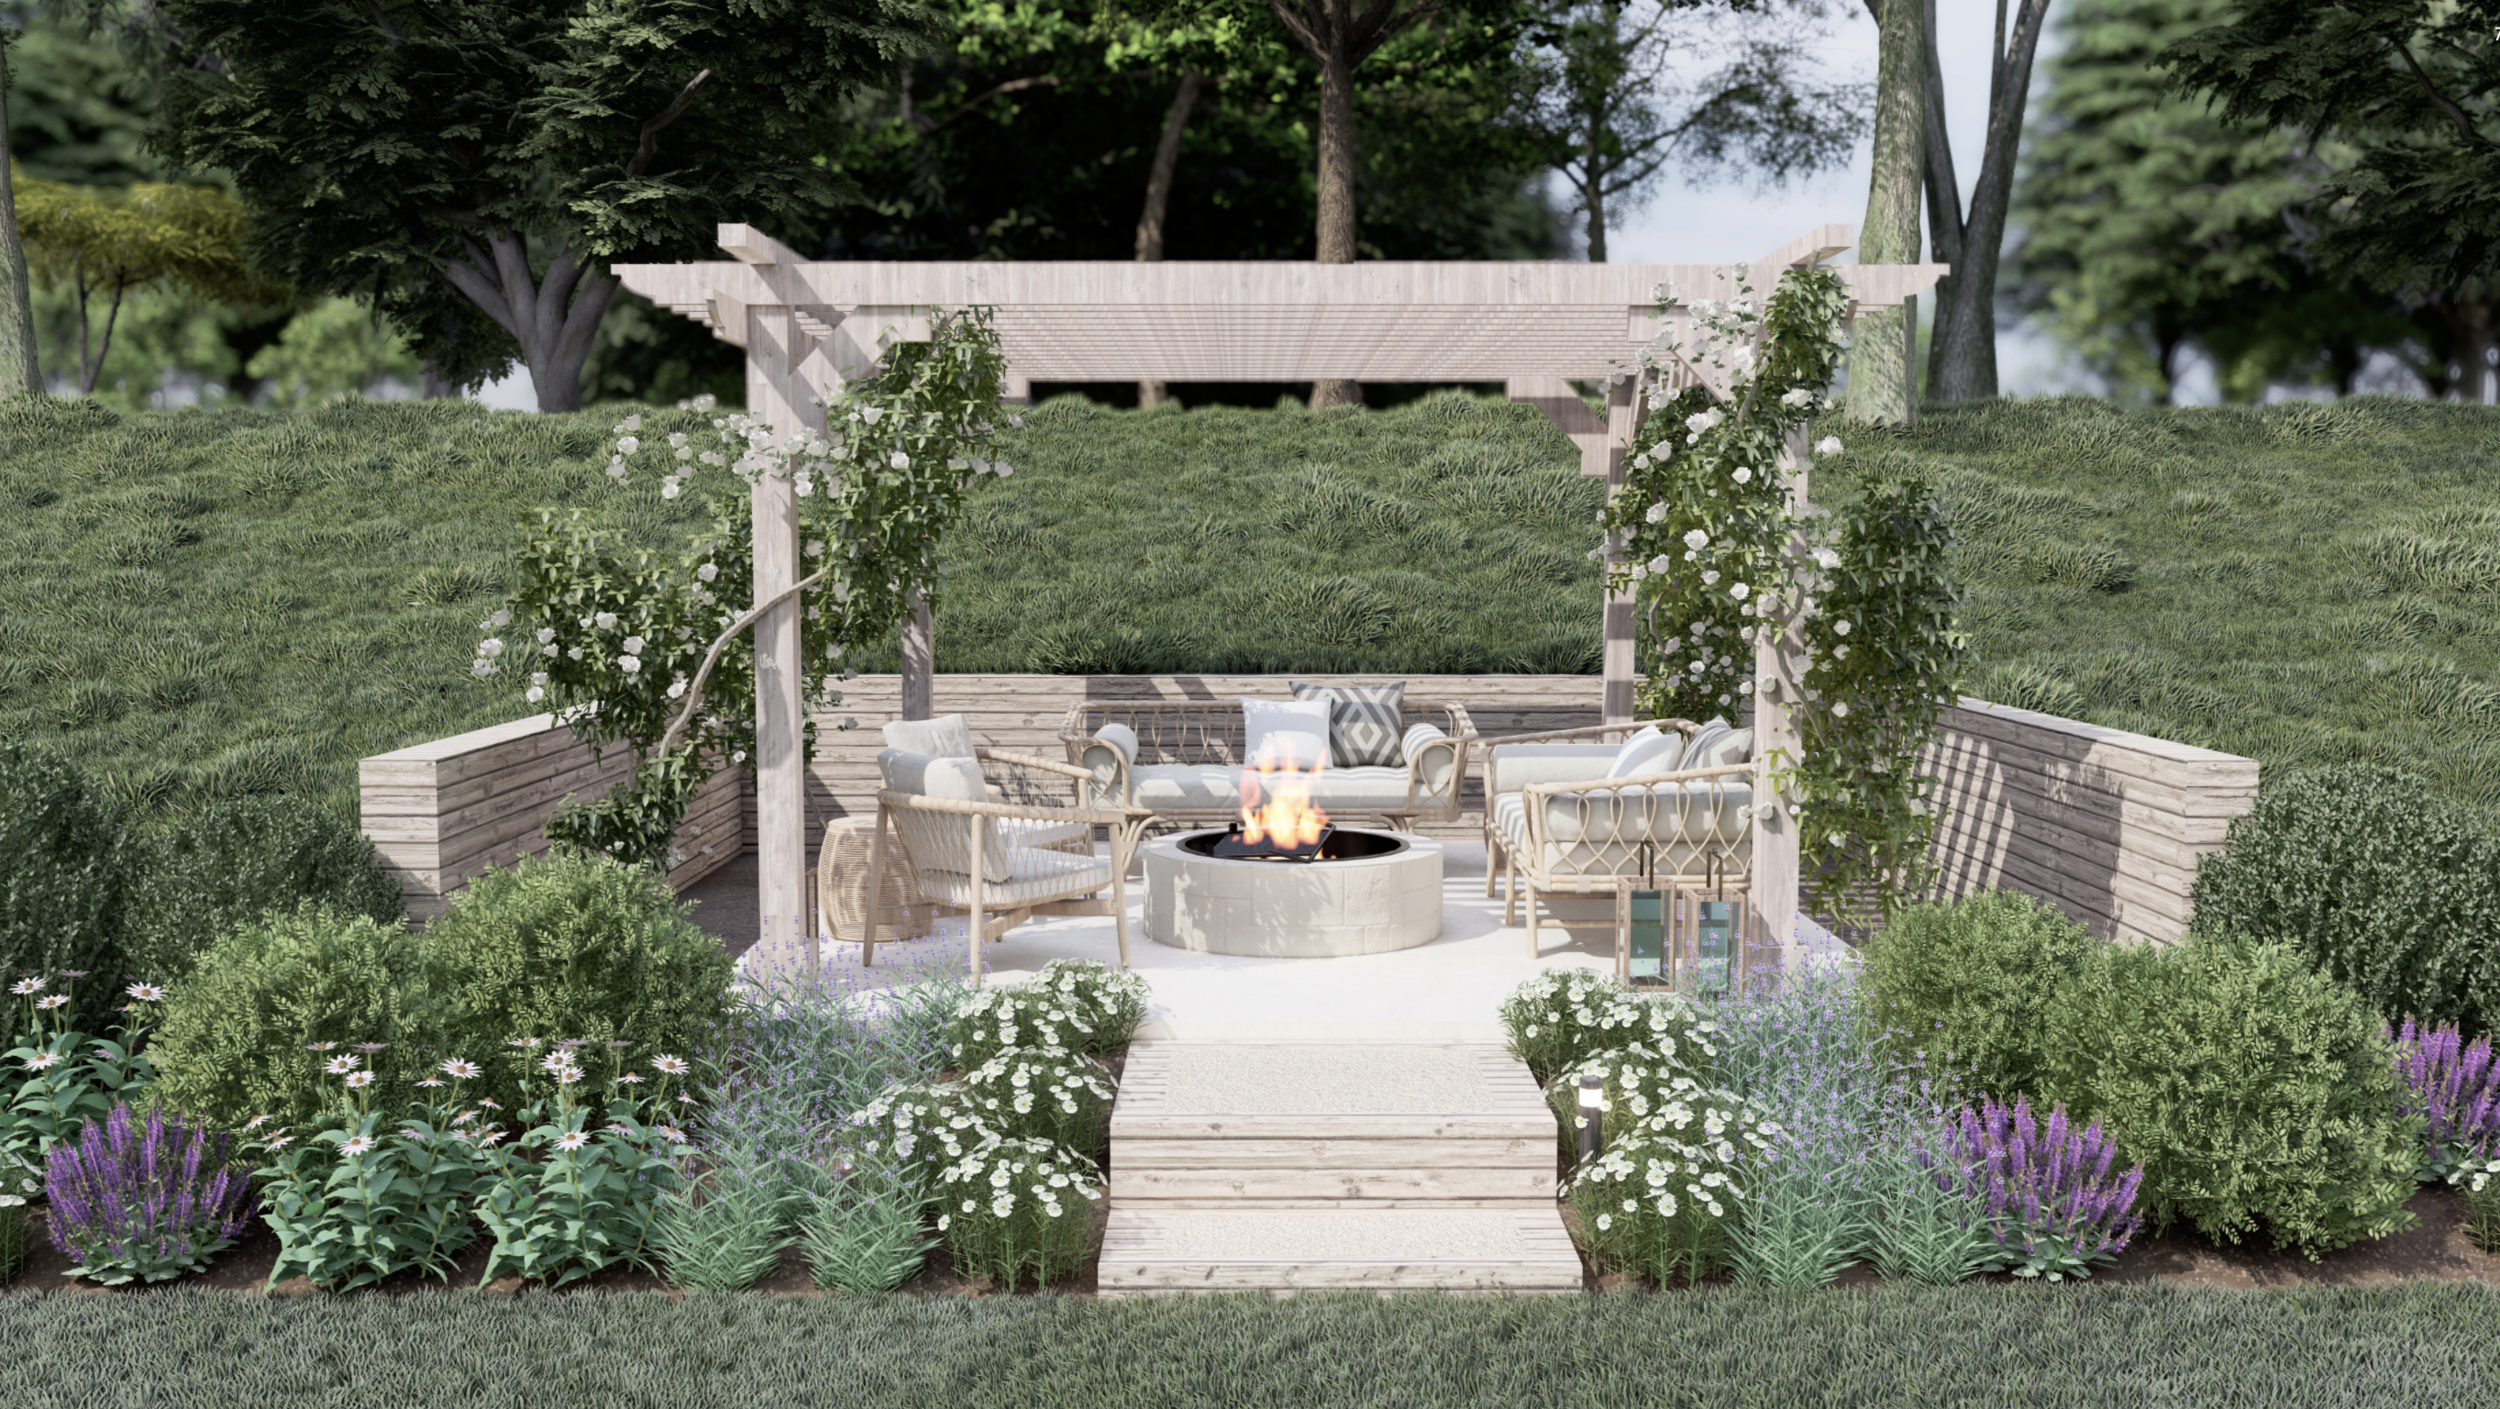 Slope lush garden, pergola decorated with plants over outdoor sitting area and fire pit